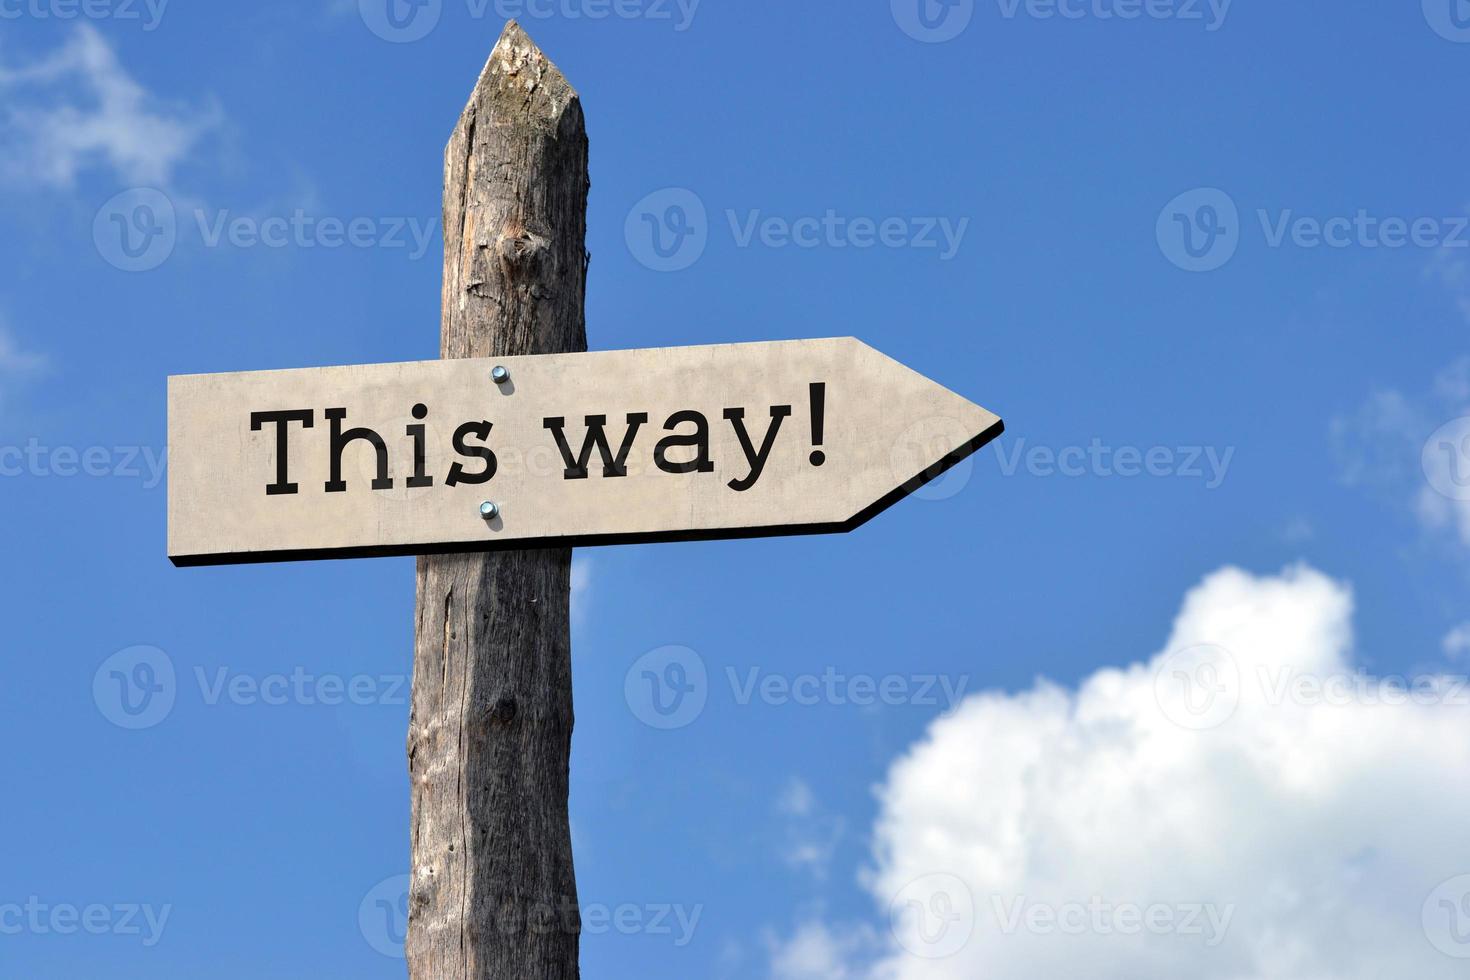 This Way - Wooden Signpost with one Arrow, Sky with Clouds photo